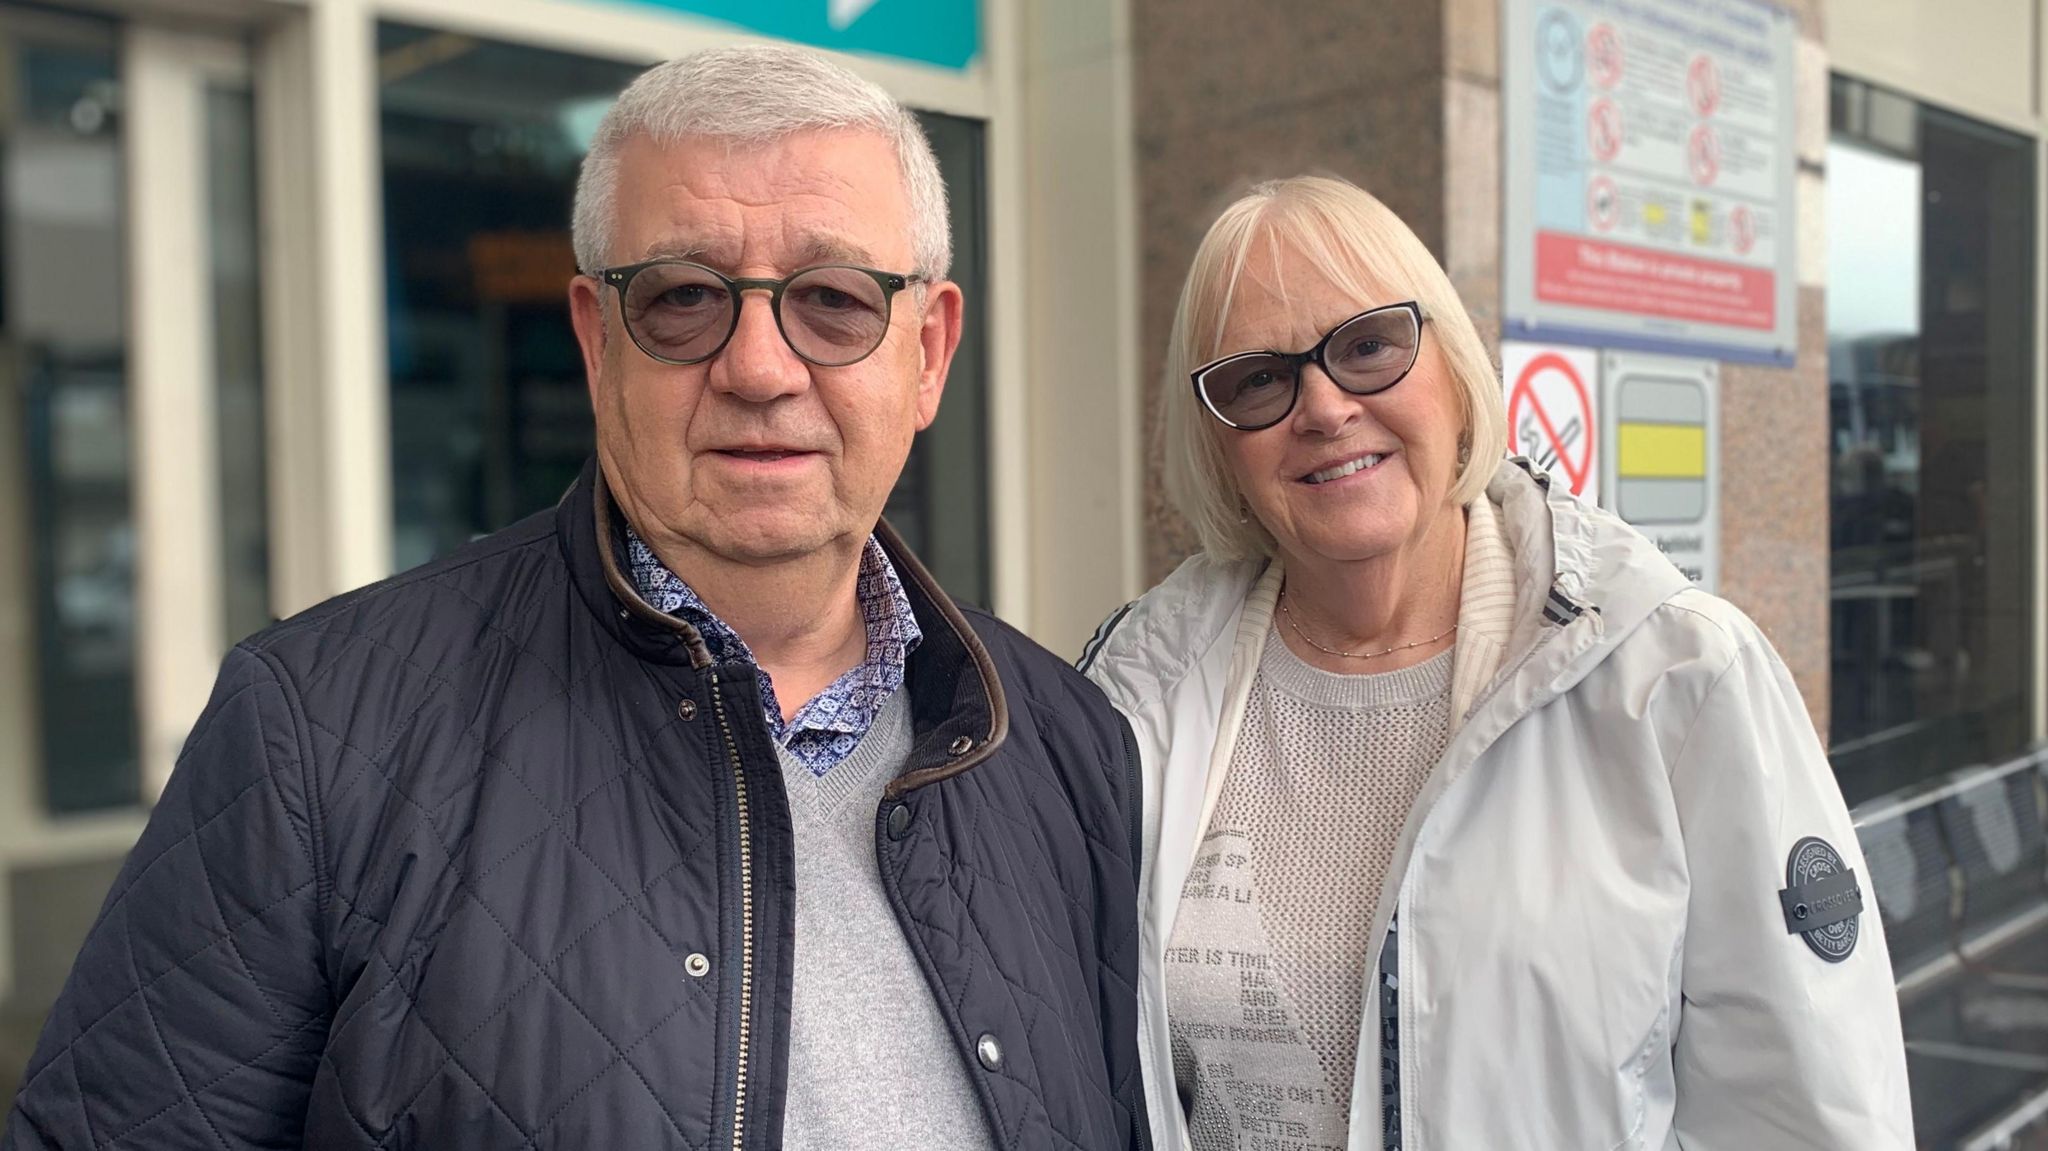 Derek and Anne Smyth - a grey-haired man wearing circular glasses and a navy quilted jacket stands beside a blonde woman wearing glasses and a grey raincoat